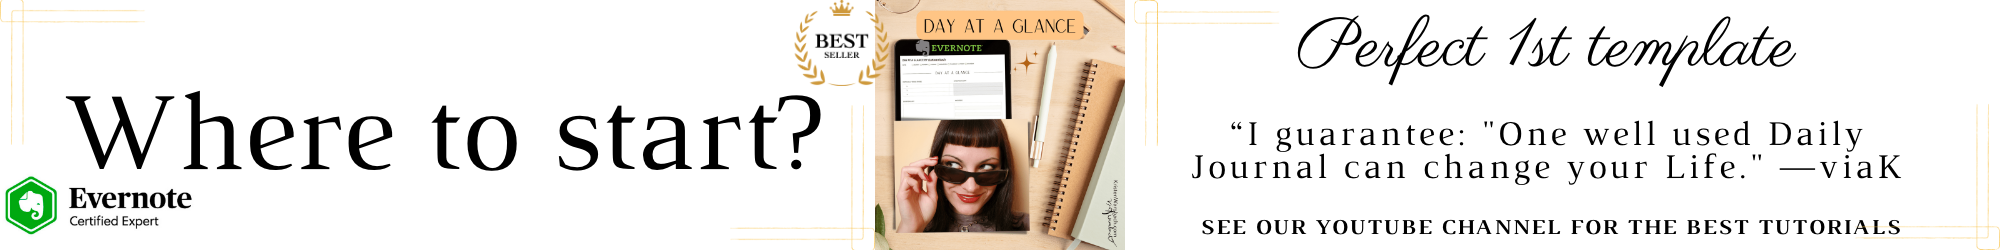 Evernote Day at a Glance Digital Planner